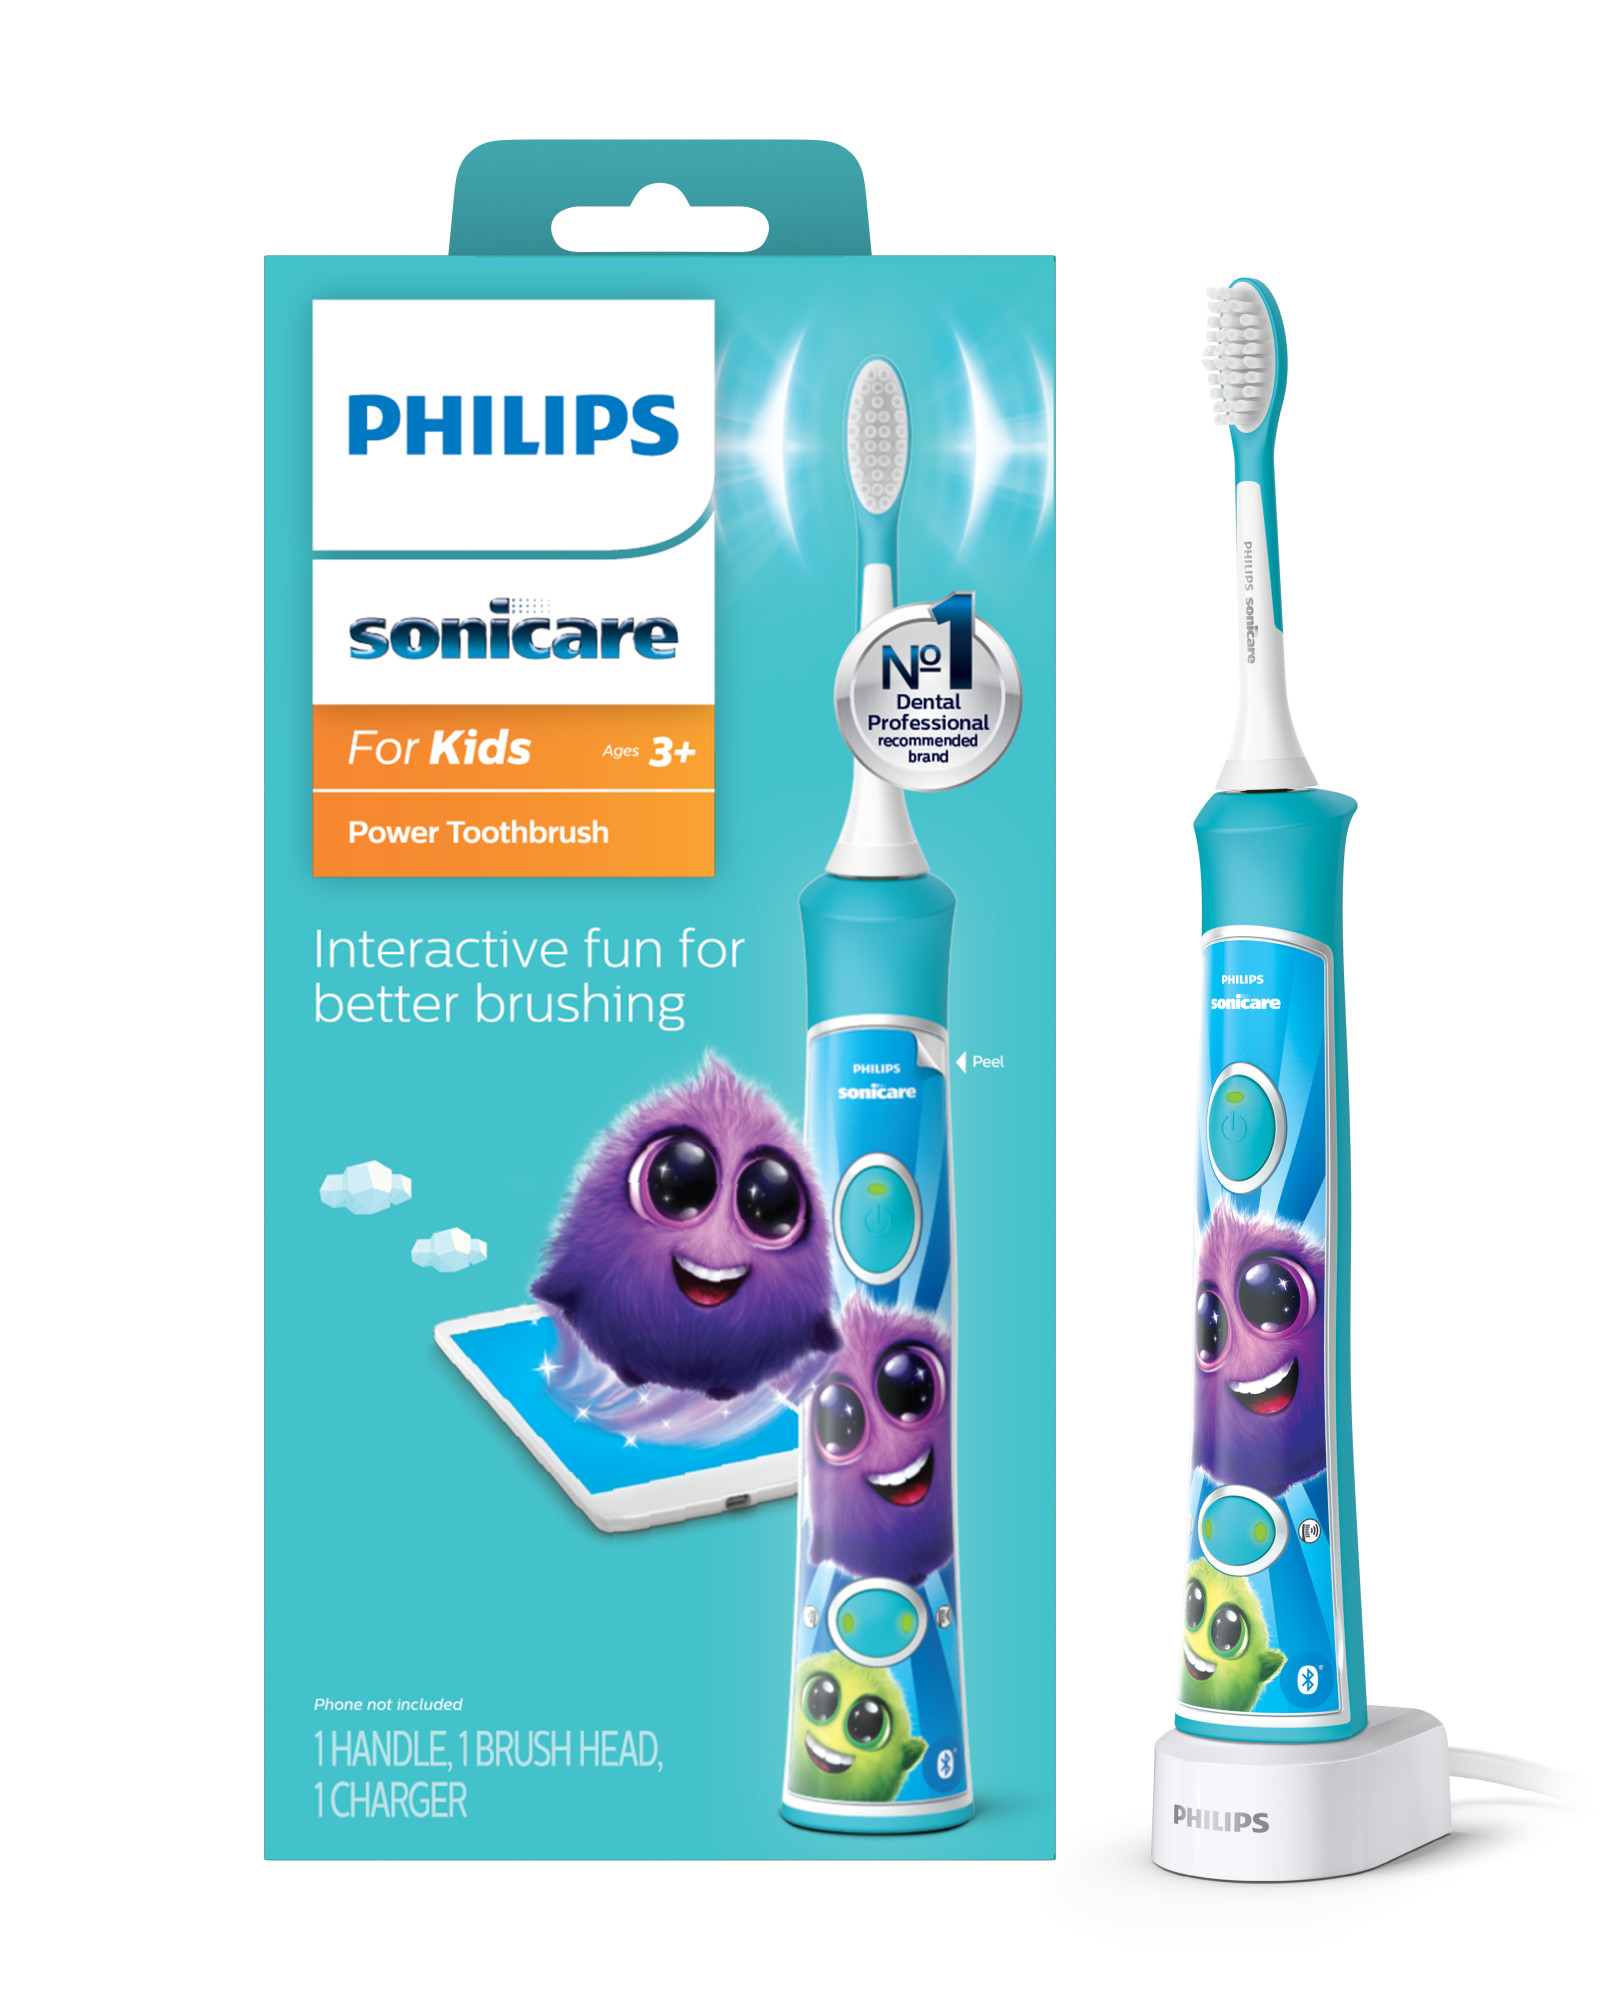 Philips Sonicare For Kids Bluetooth Connected Electric Rechargeable Toothbrush, HX6321/02 - image 1 of 27